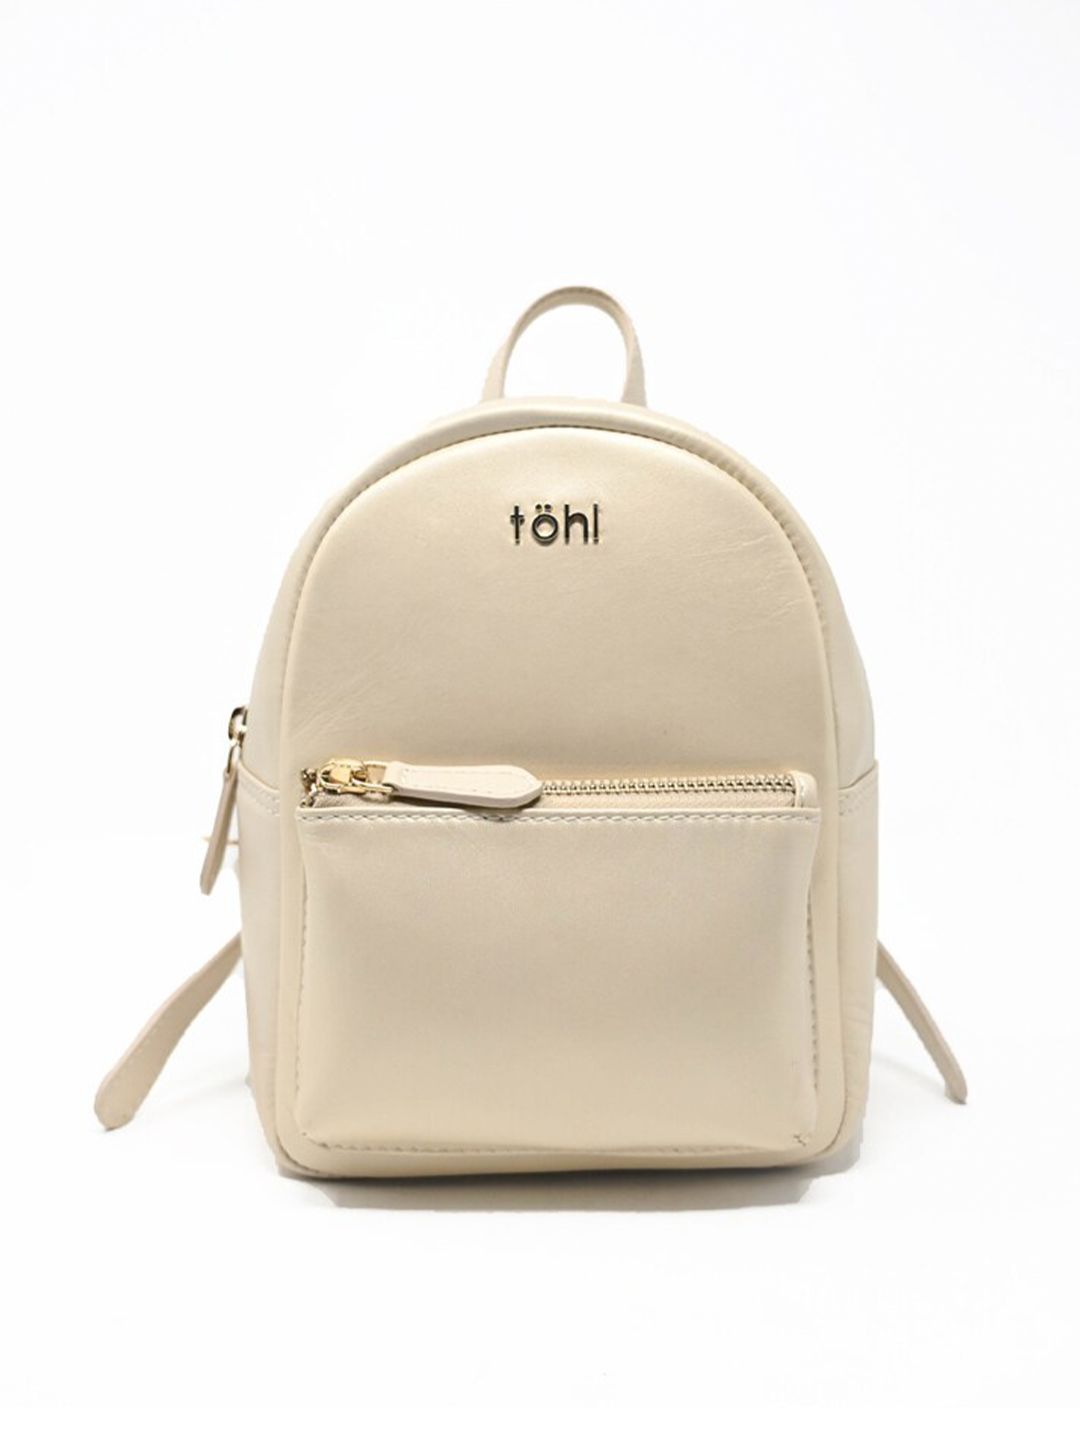 tohl Women Off White Backpack Price in India